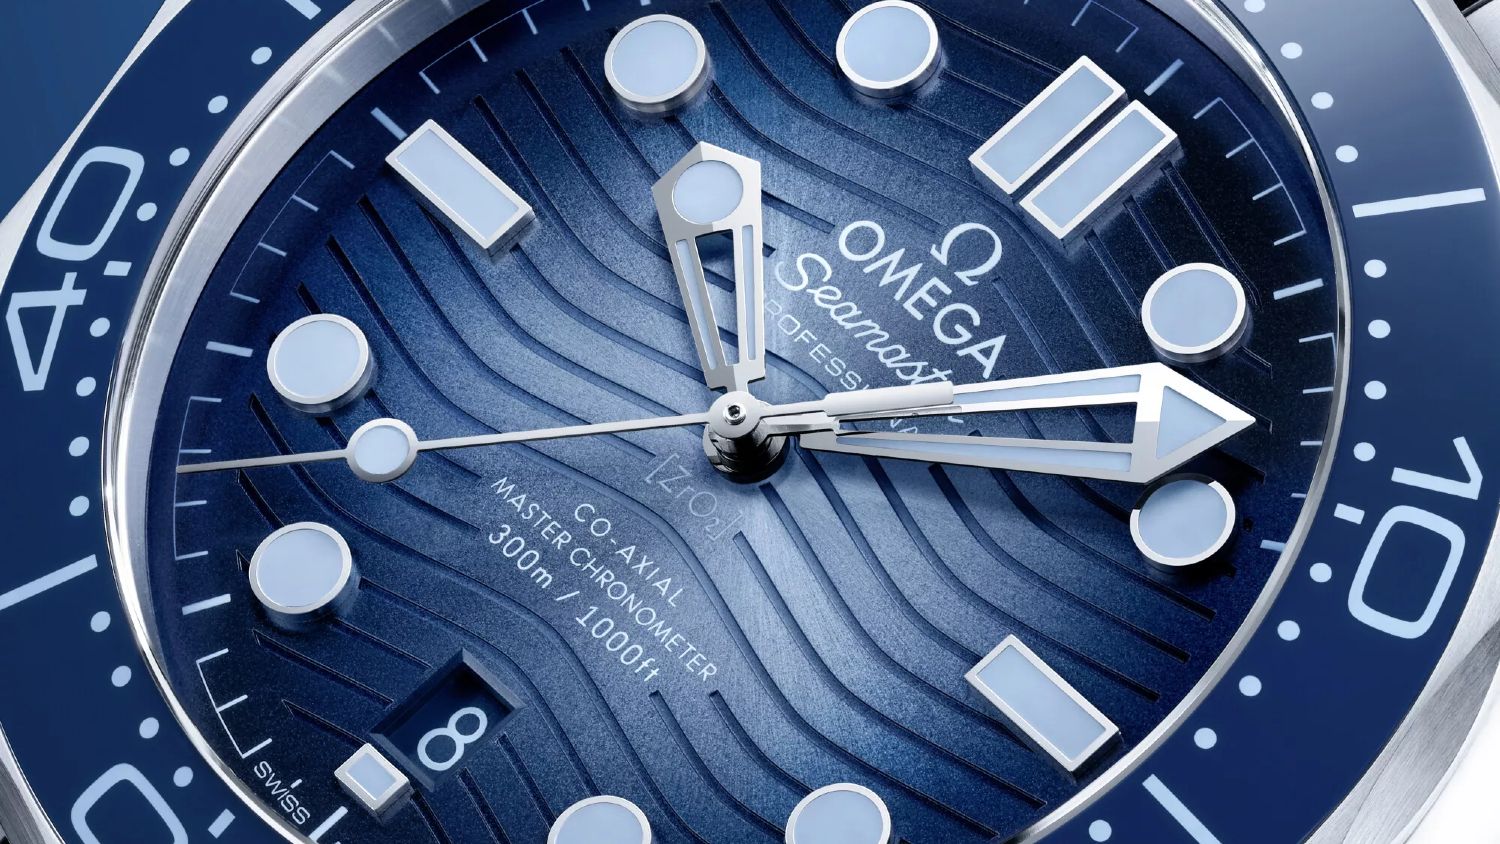 Omega Olympic Watches Ultimate Buying Guide - Bob's Watches-hkpdtq2012.edu.vn